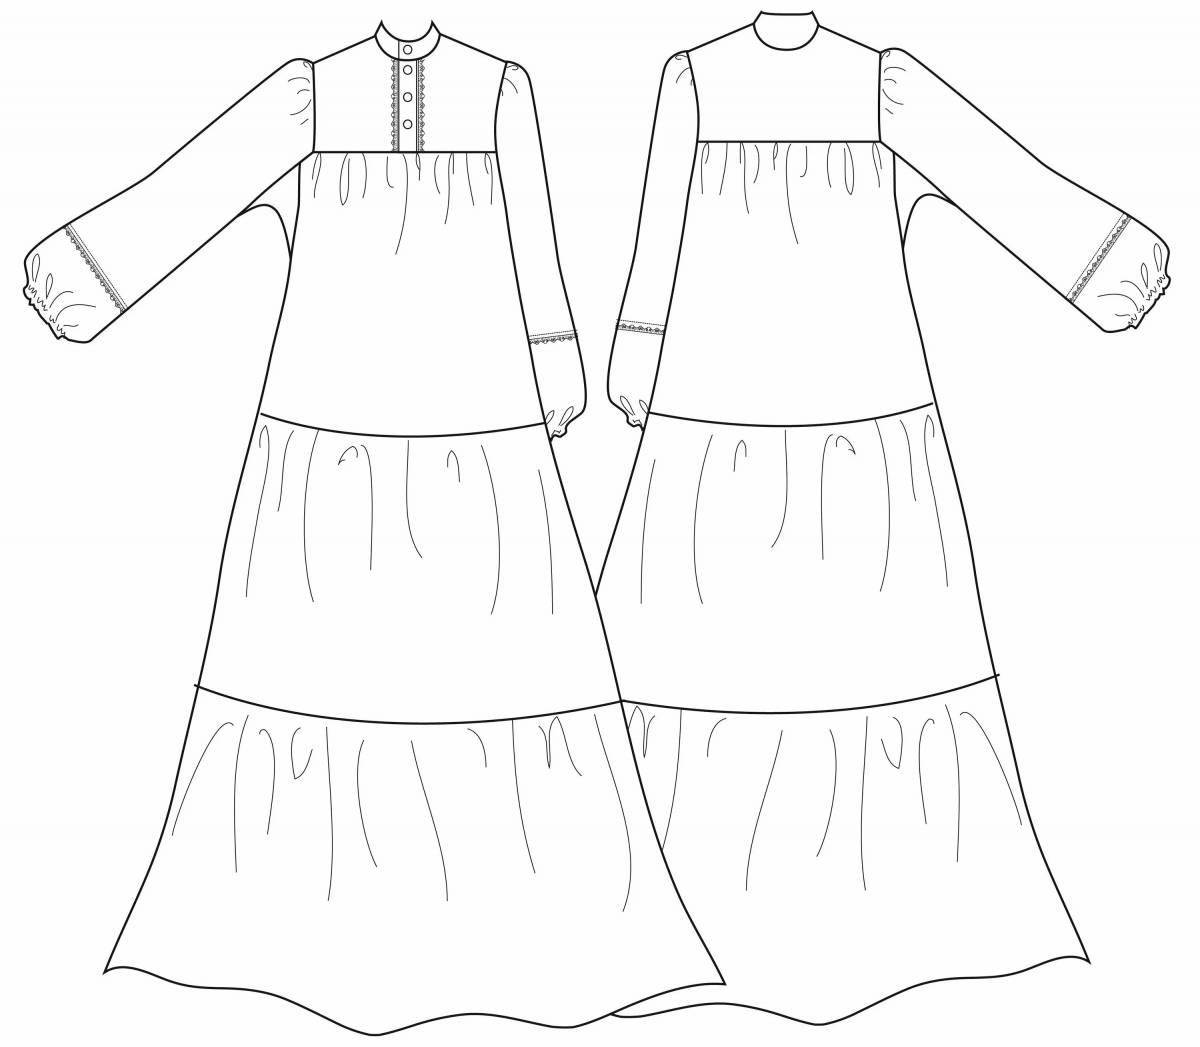 Sundress fun coloring for kids